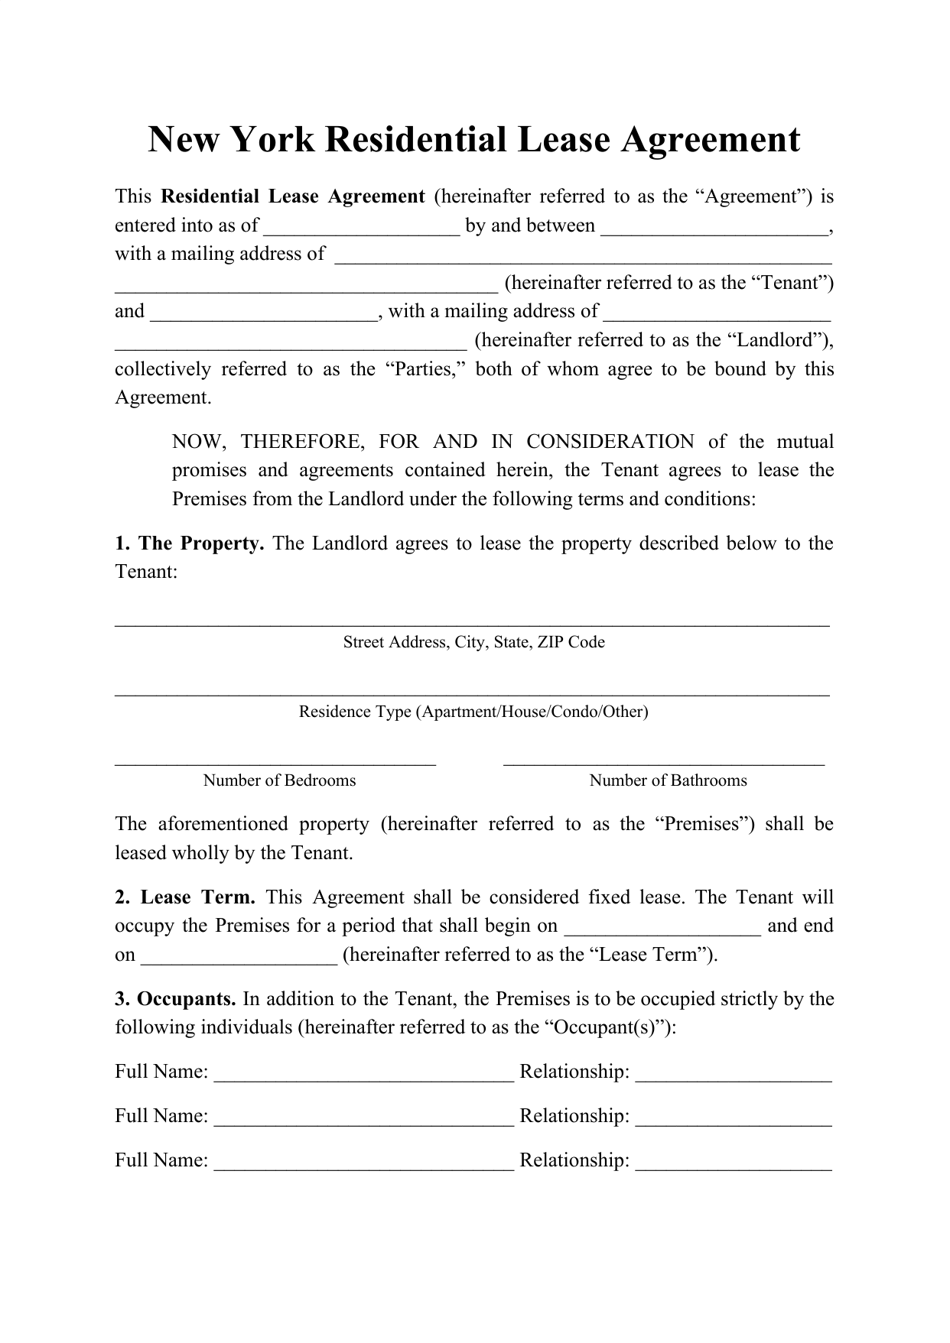 New York Residential Lease Agreement Template Fill Out Sign Online